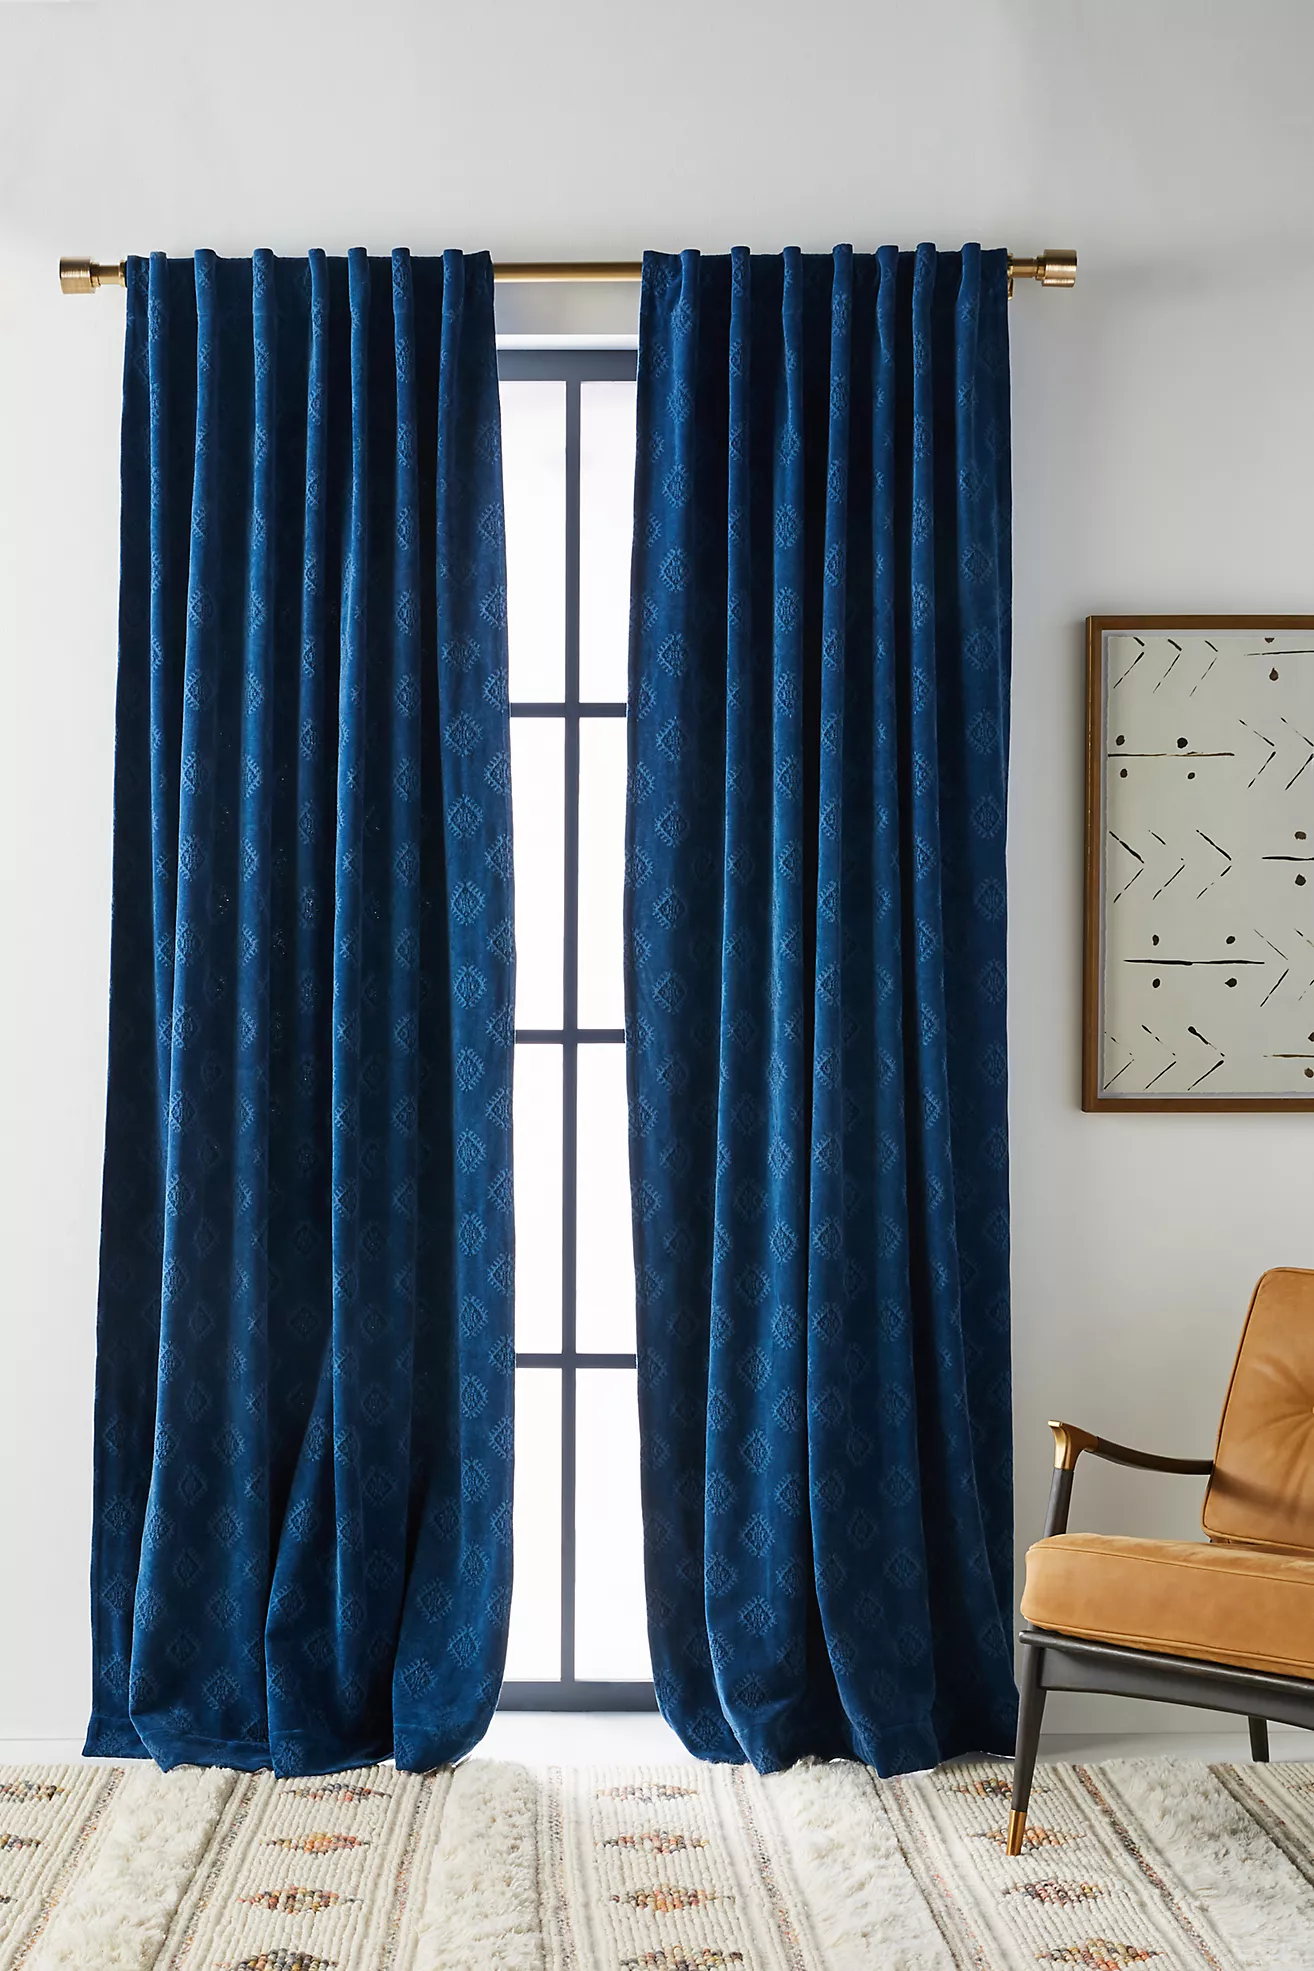 Say Eclectic With Blue Curtains